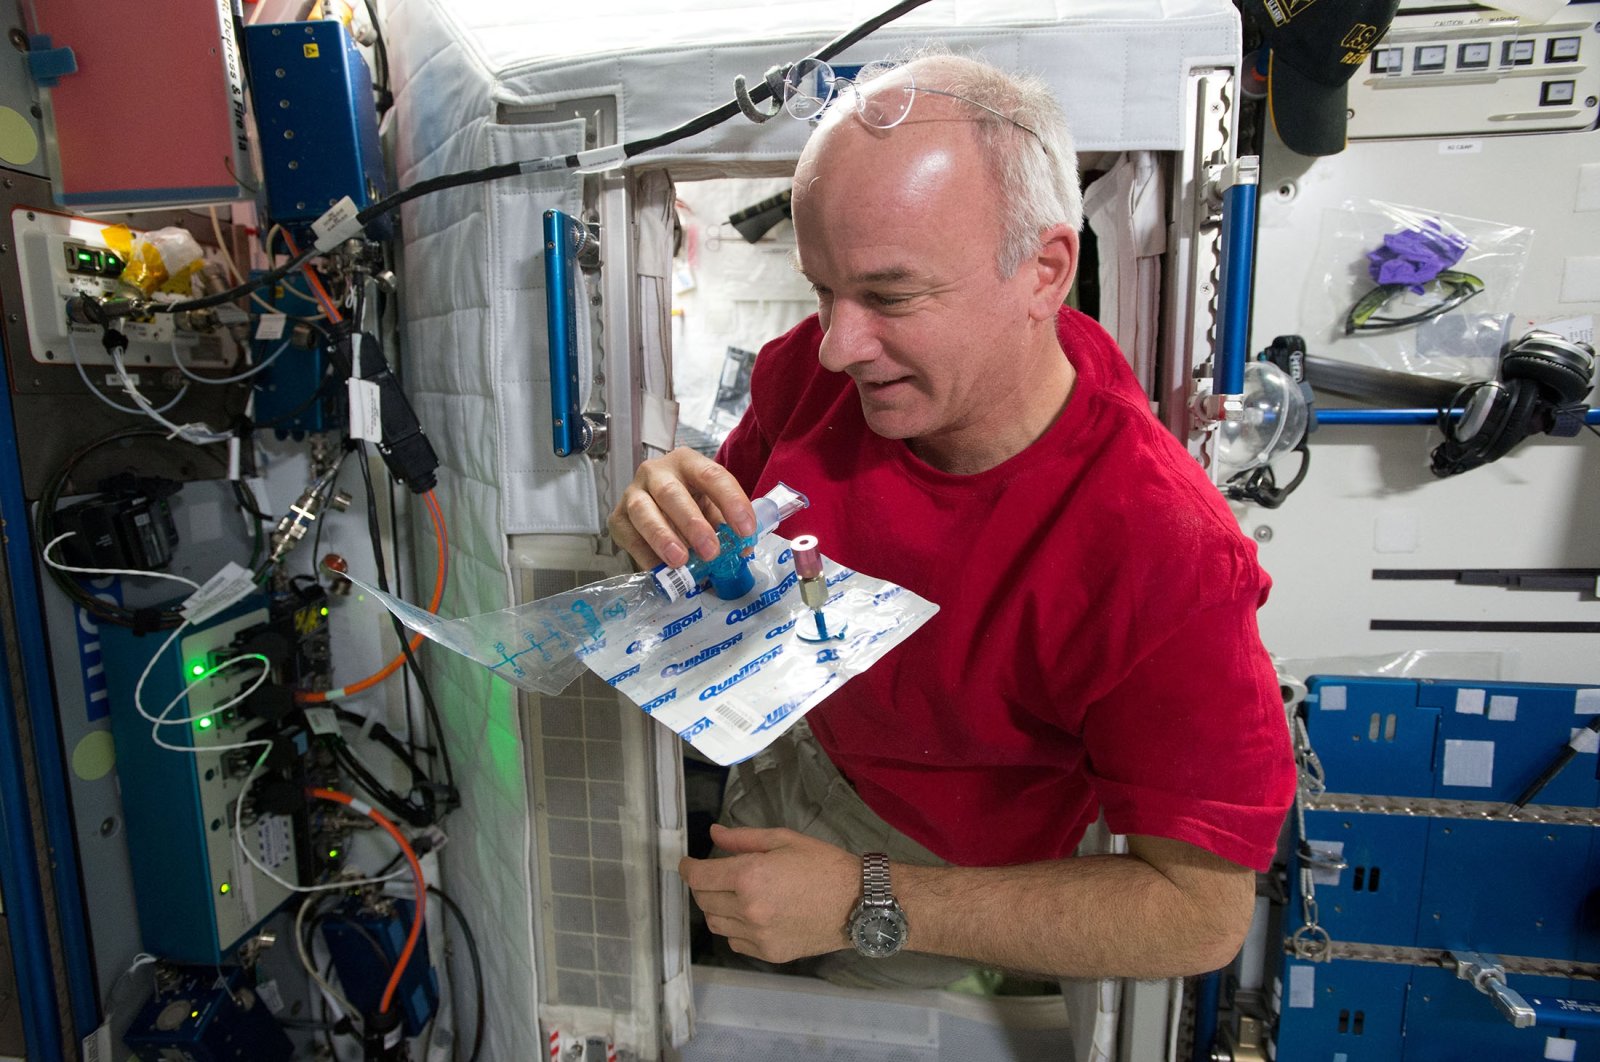 Astronaut Jeff Williams collects a breath sample on board the International Space Station, as can be seen in this undated handout photo. (NASA via Reuters)